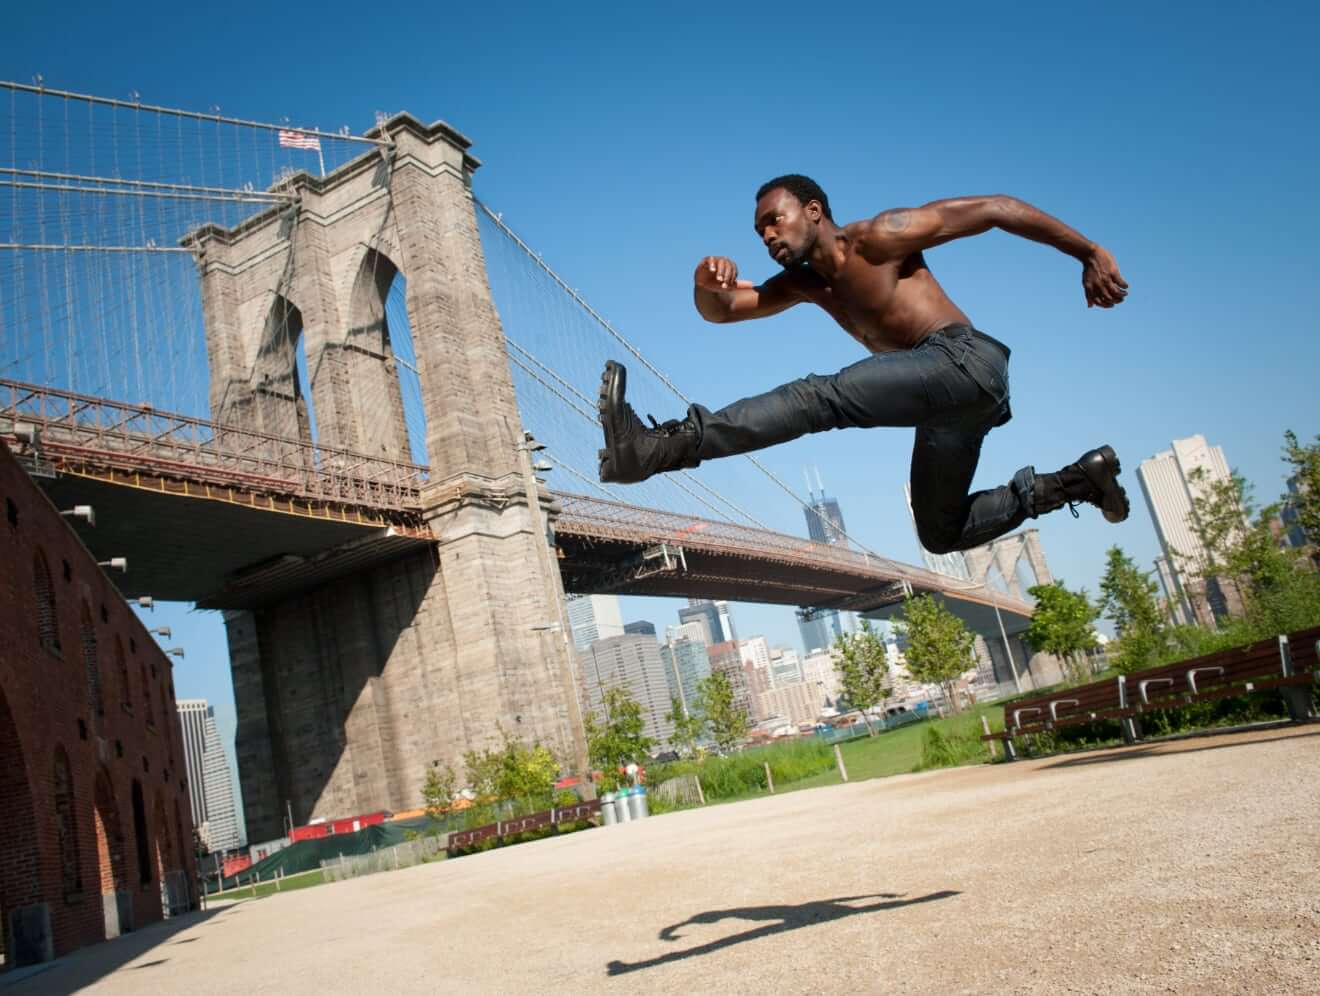 A dark-skinned man wearing jeans and black boots in a hurdle jump towards the Brooklyn Bridge with the backdrop of the Manhattan skyline and blue sky.